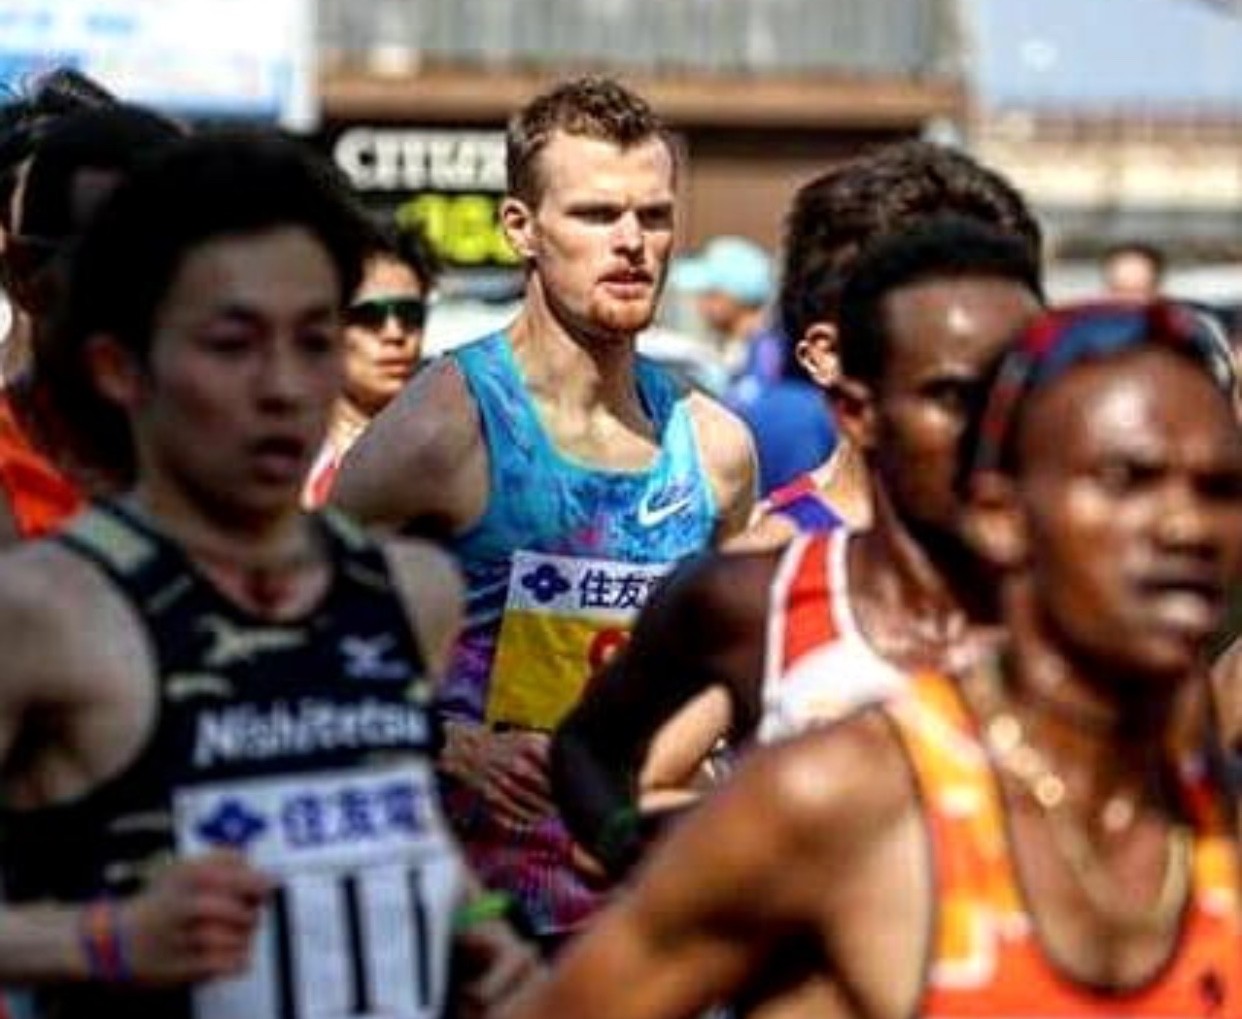 Jake Robertson sets the New Zealand National Marathon Record on his first Attempt 